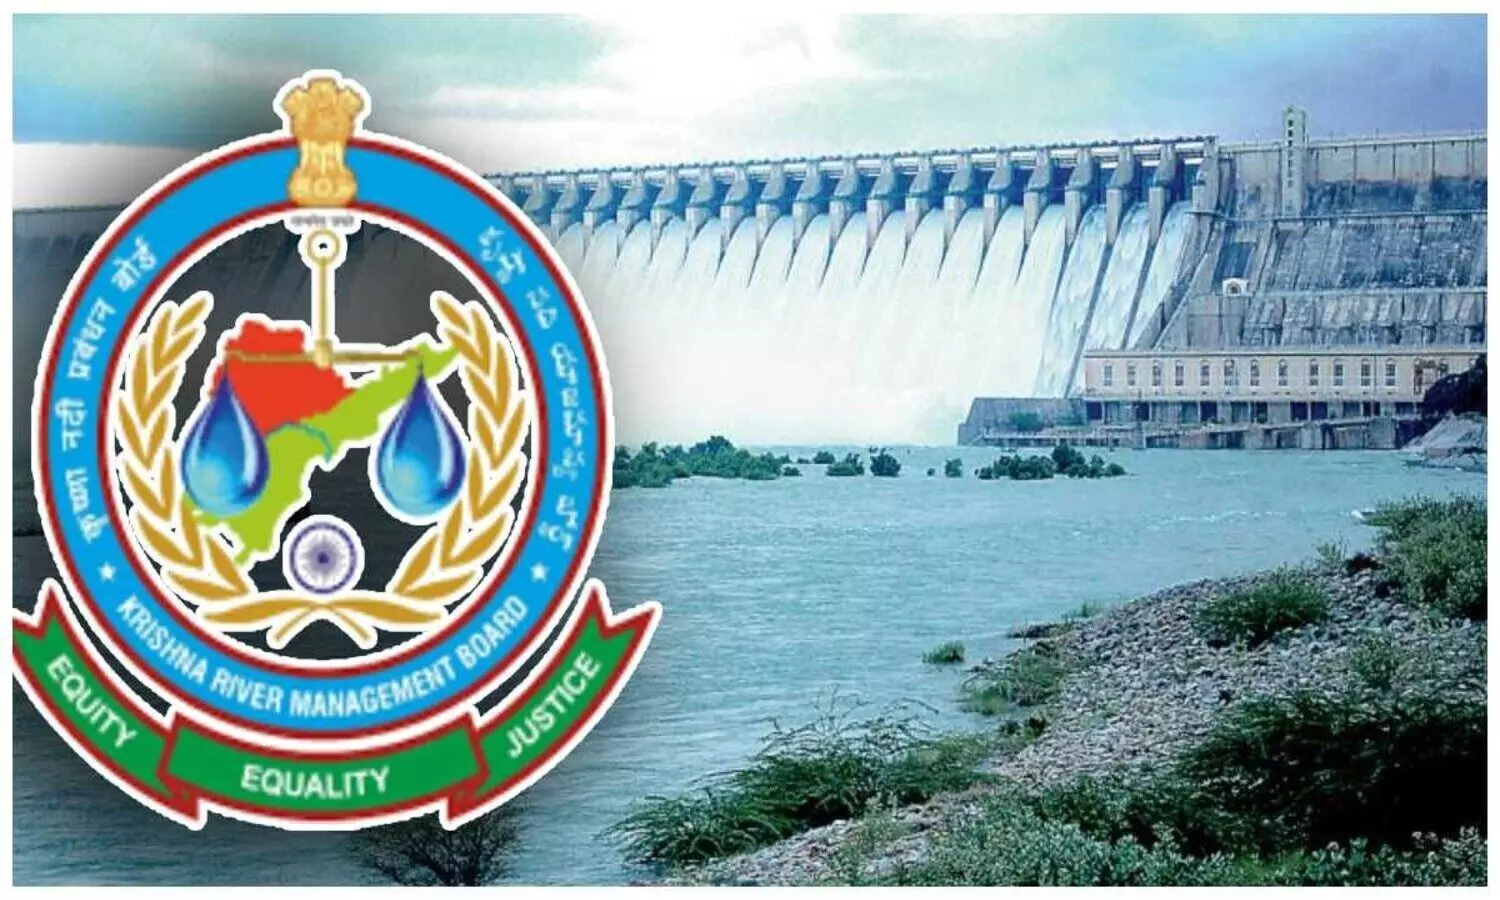 Telangana blames AP for illegally withdrawing water from Nagarjunasagar, to raise issue with KRMB